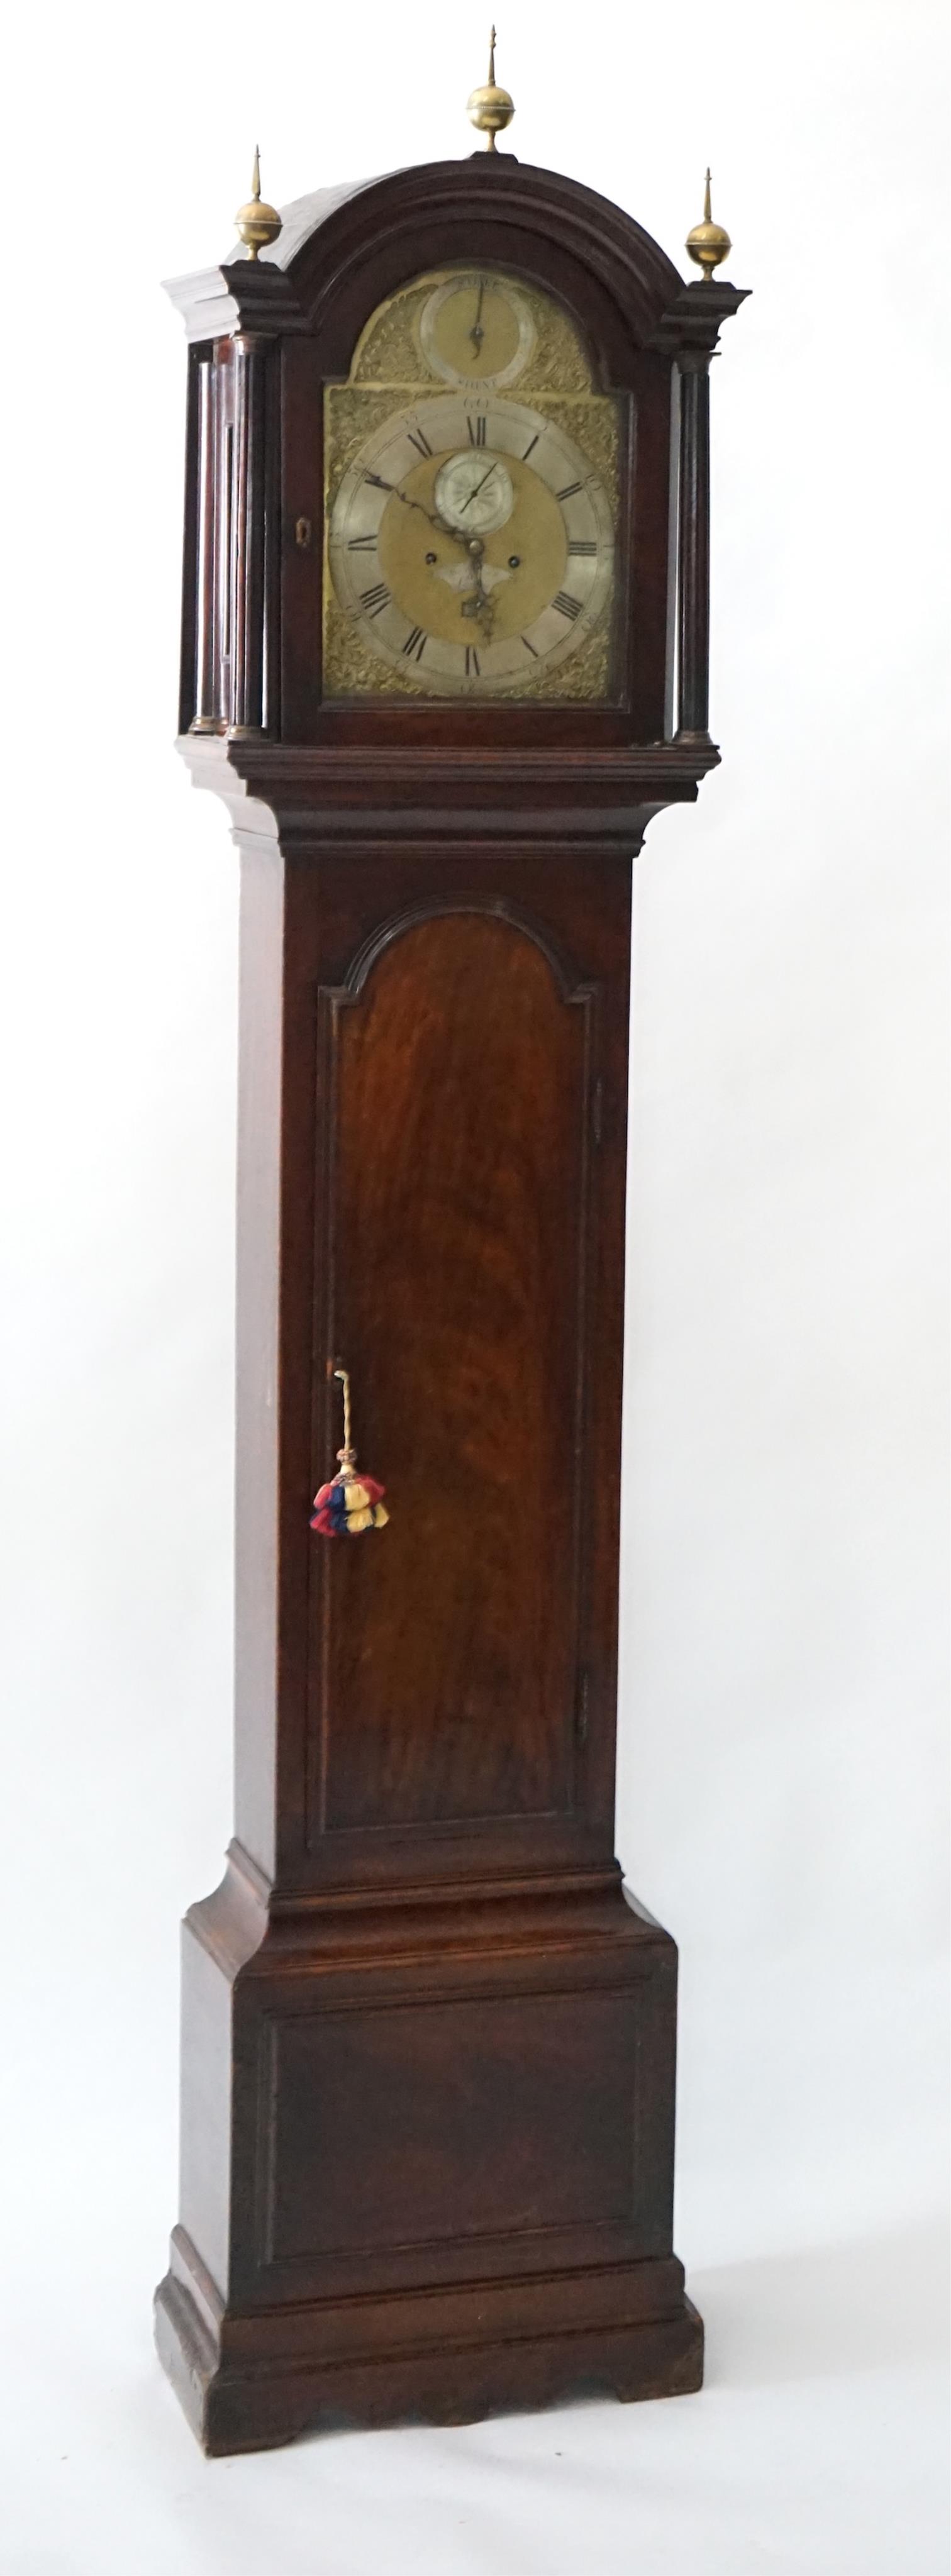 Thomas Garner of London, a George III mahogany eight day longcase clock, the arched brass dial with silvered strike / silent, Roman chapter ring, subsidiary seconds and date aperture, five pillar movement with anchor esc